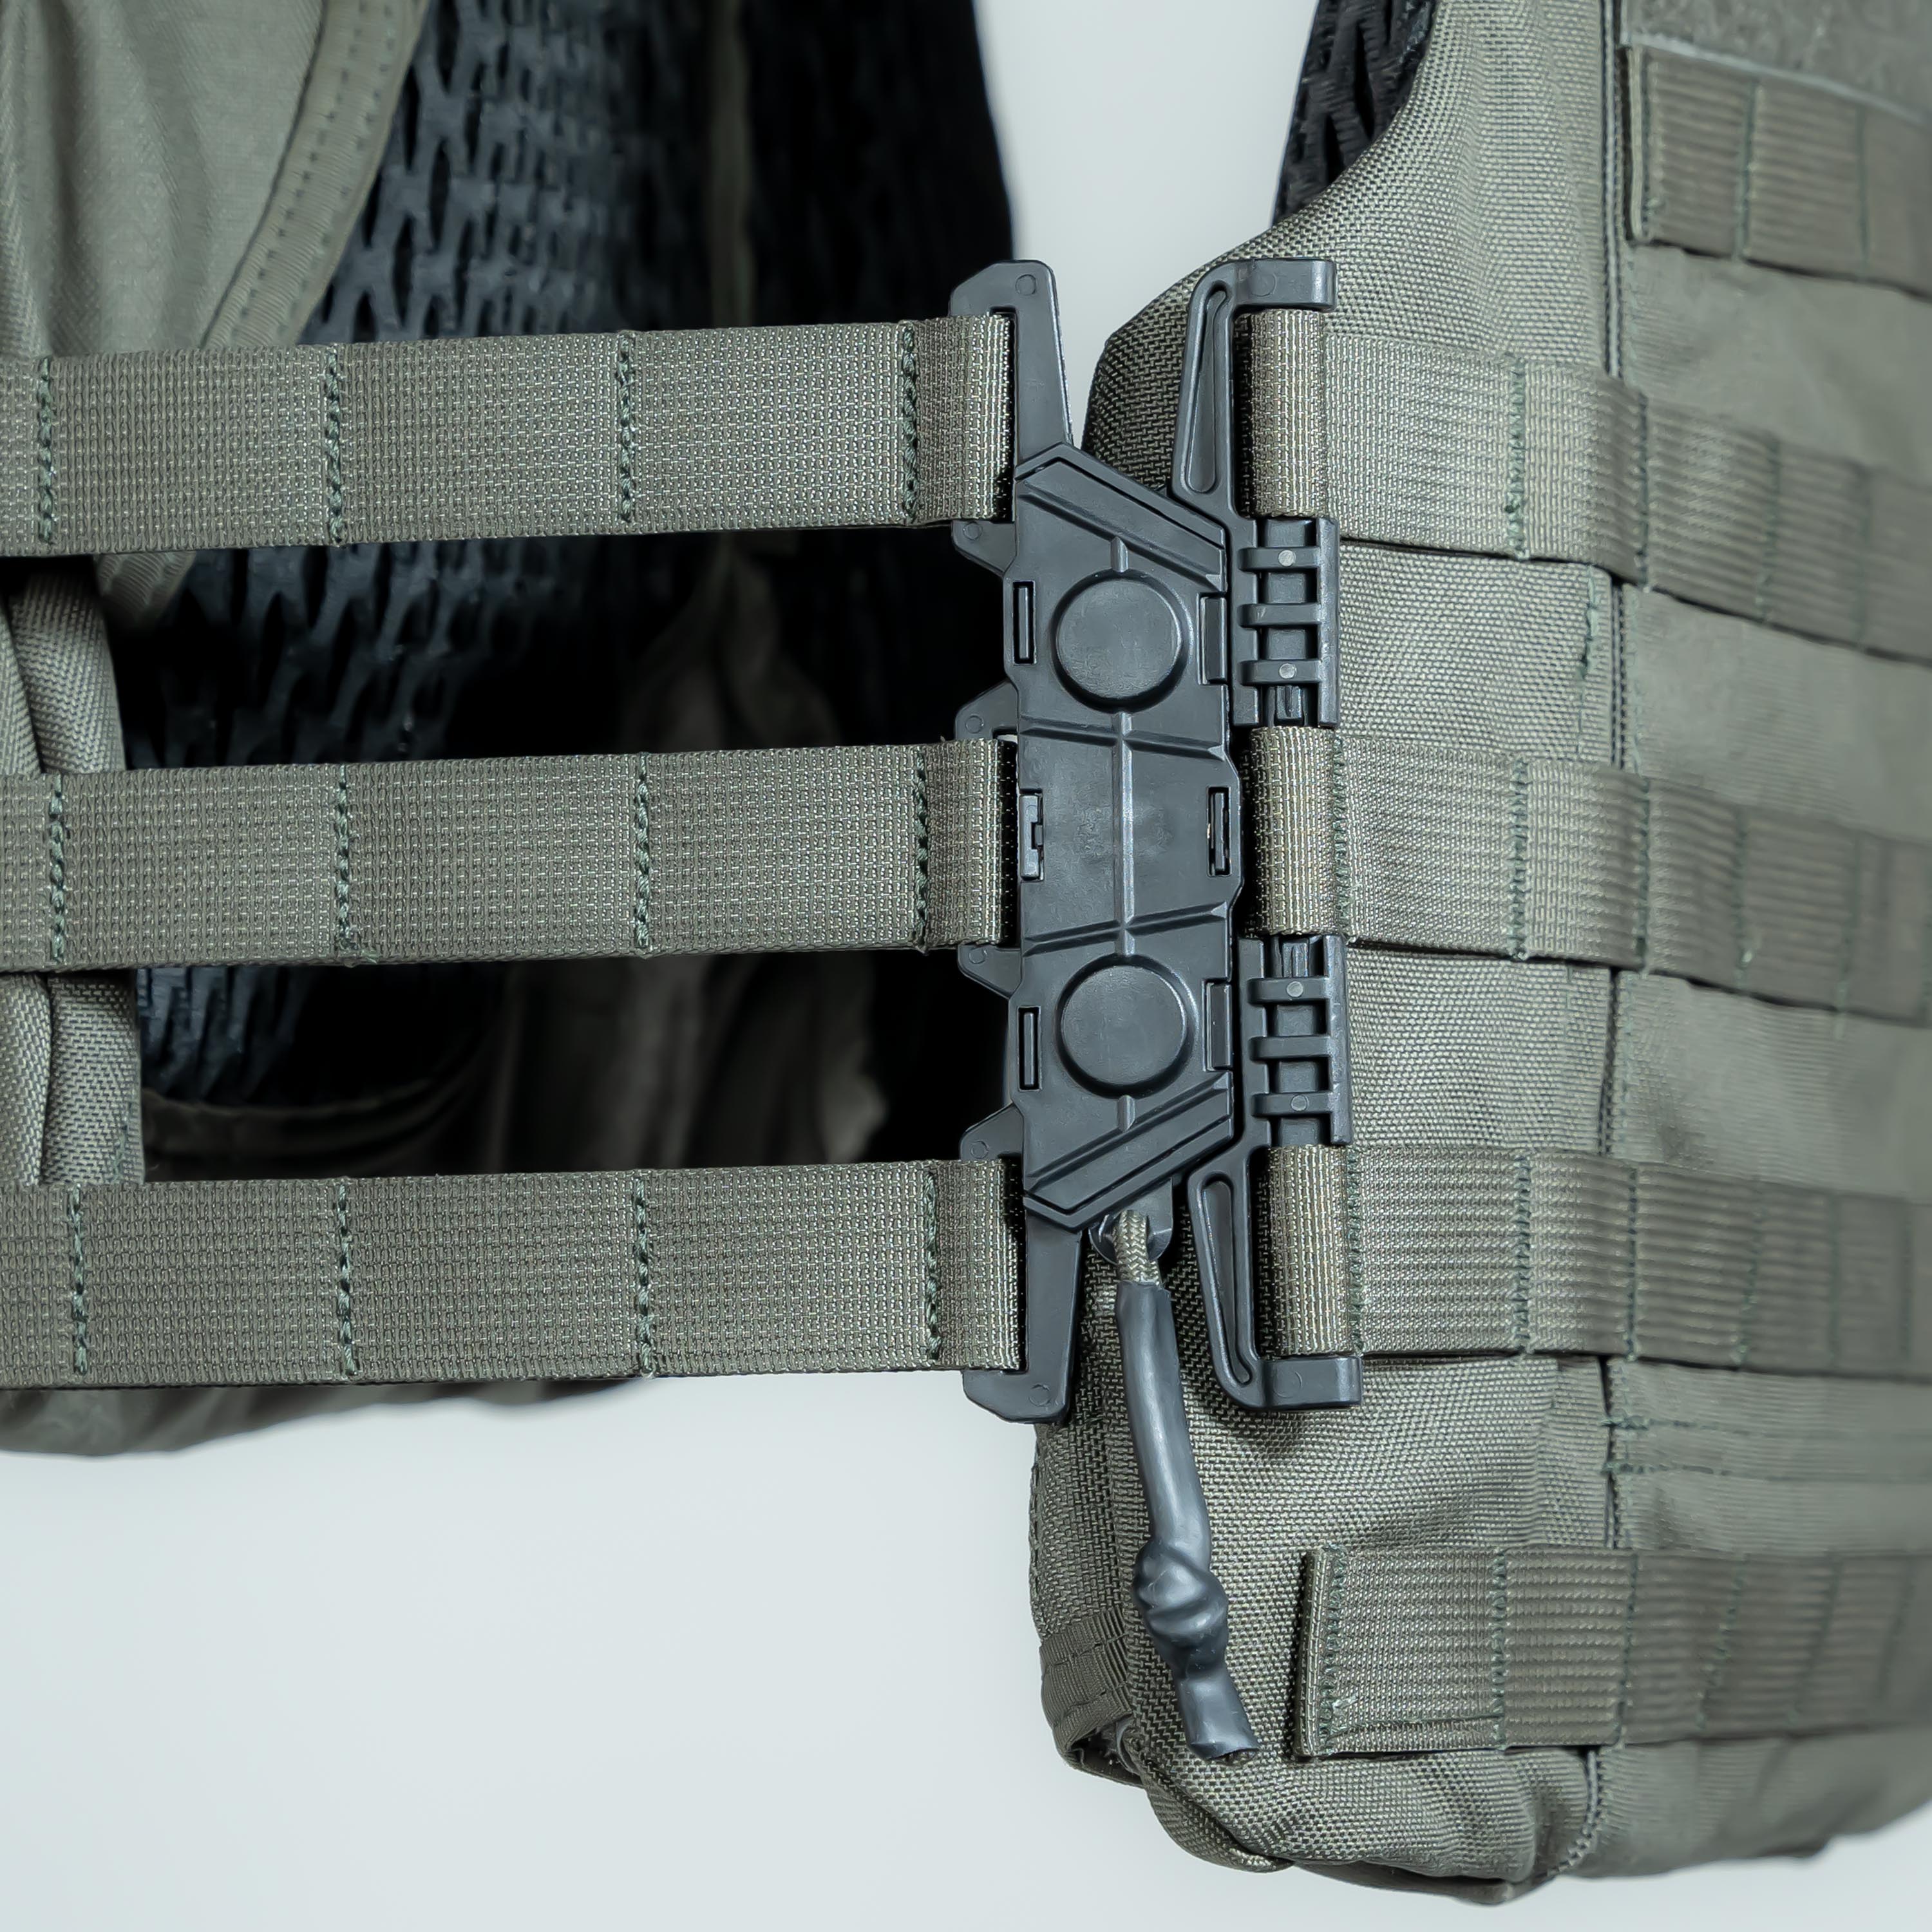 Commando vest - Pre-order for delivery in May 2024